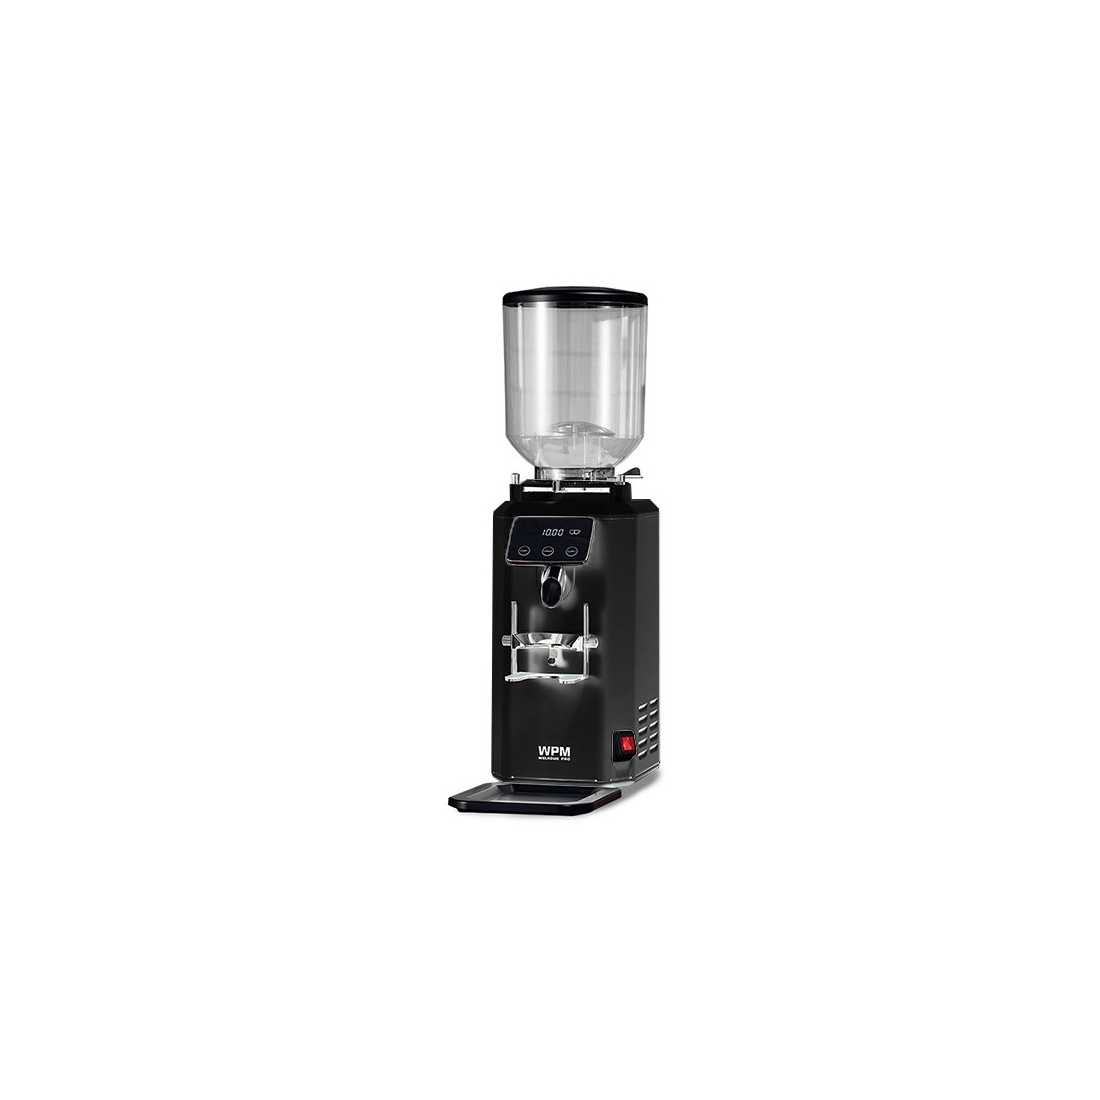 WPM (ZD-18) On-Demand Commercial Coffee Grinder Black|mkayn|مكاين